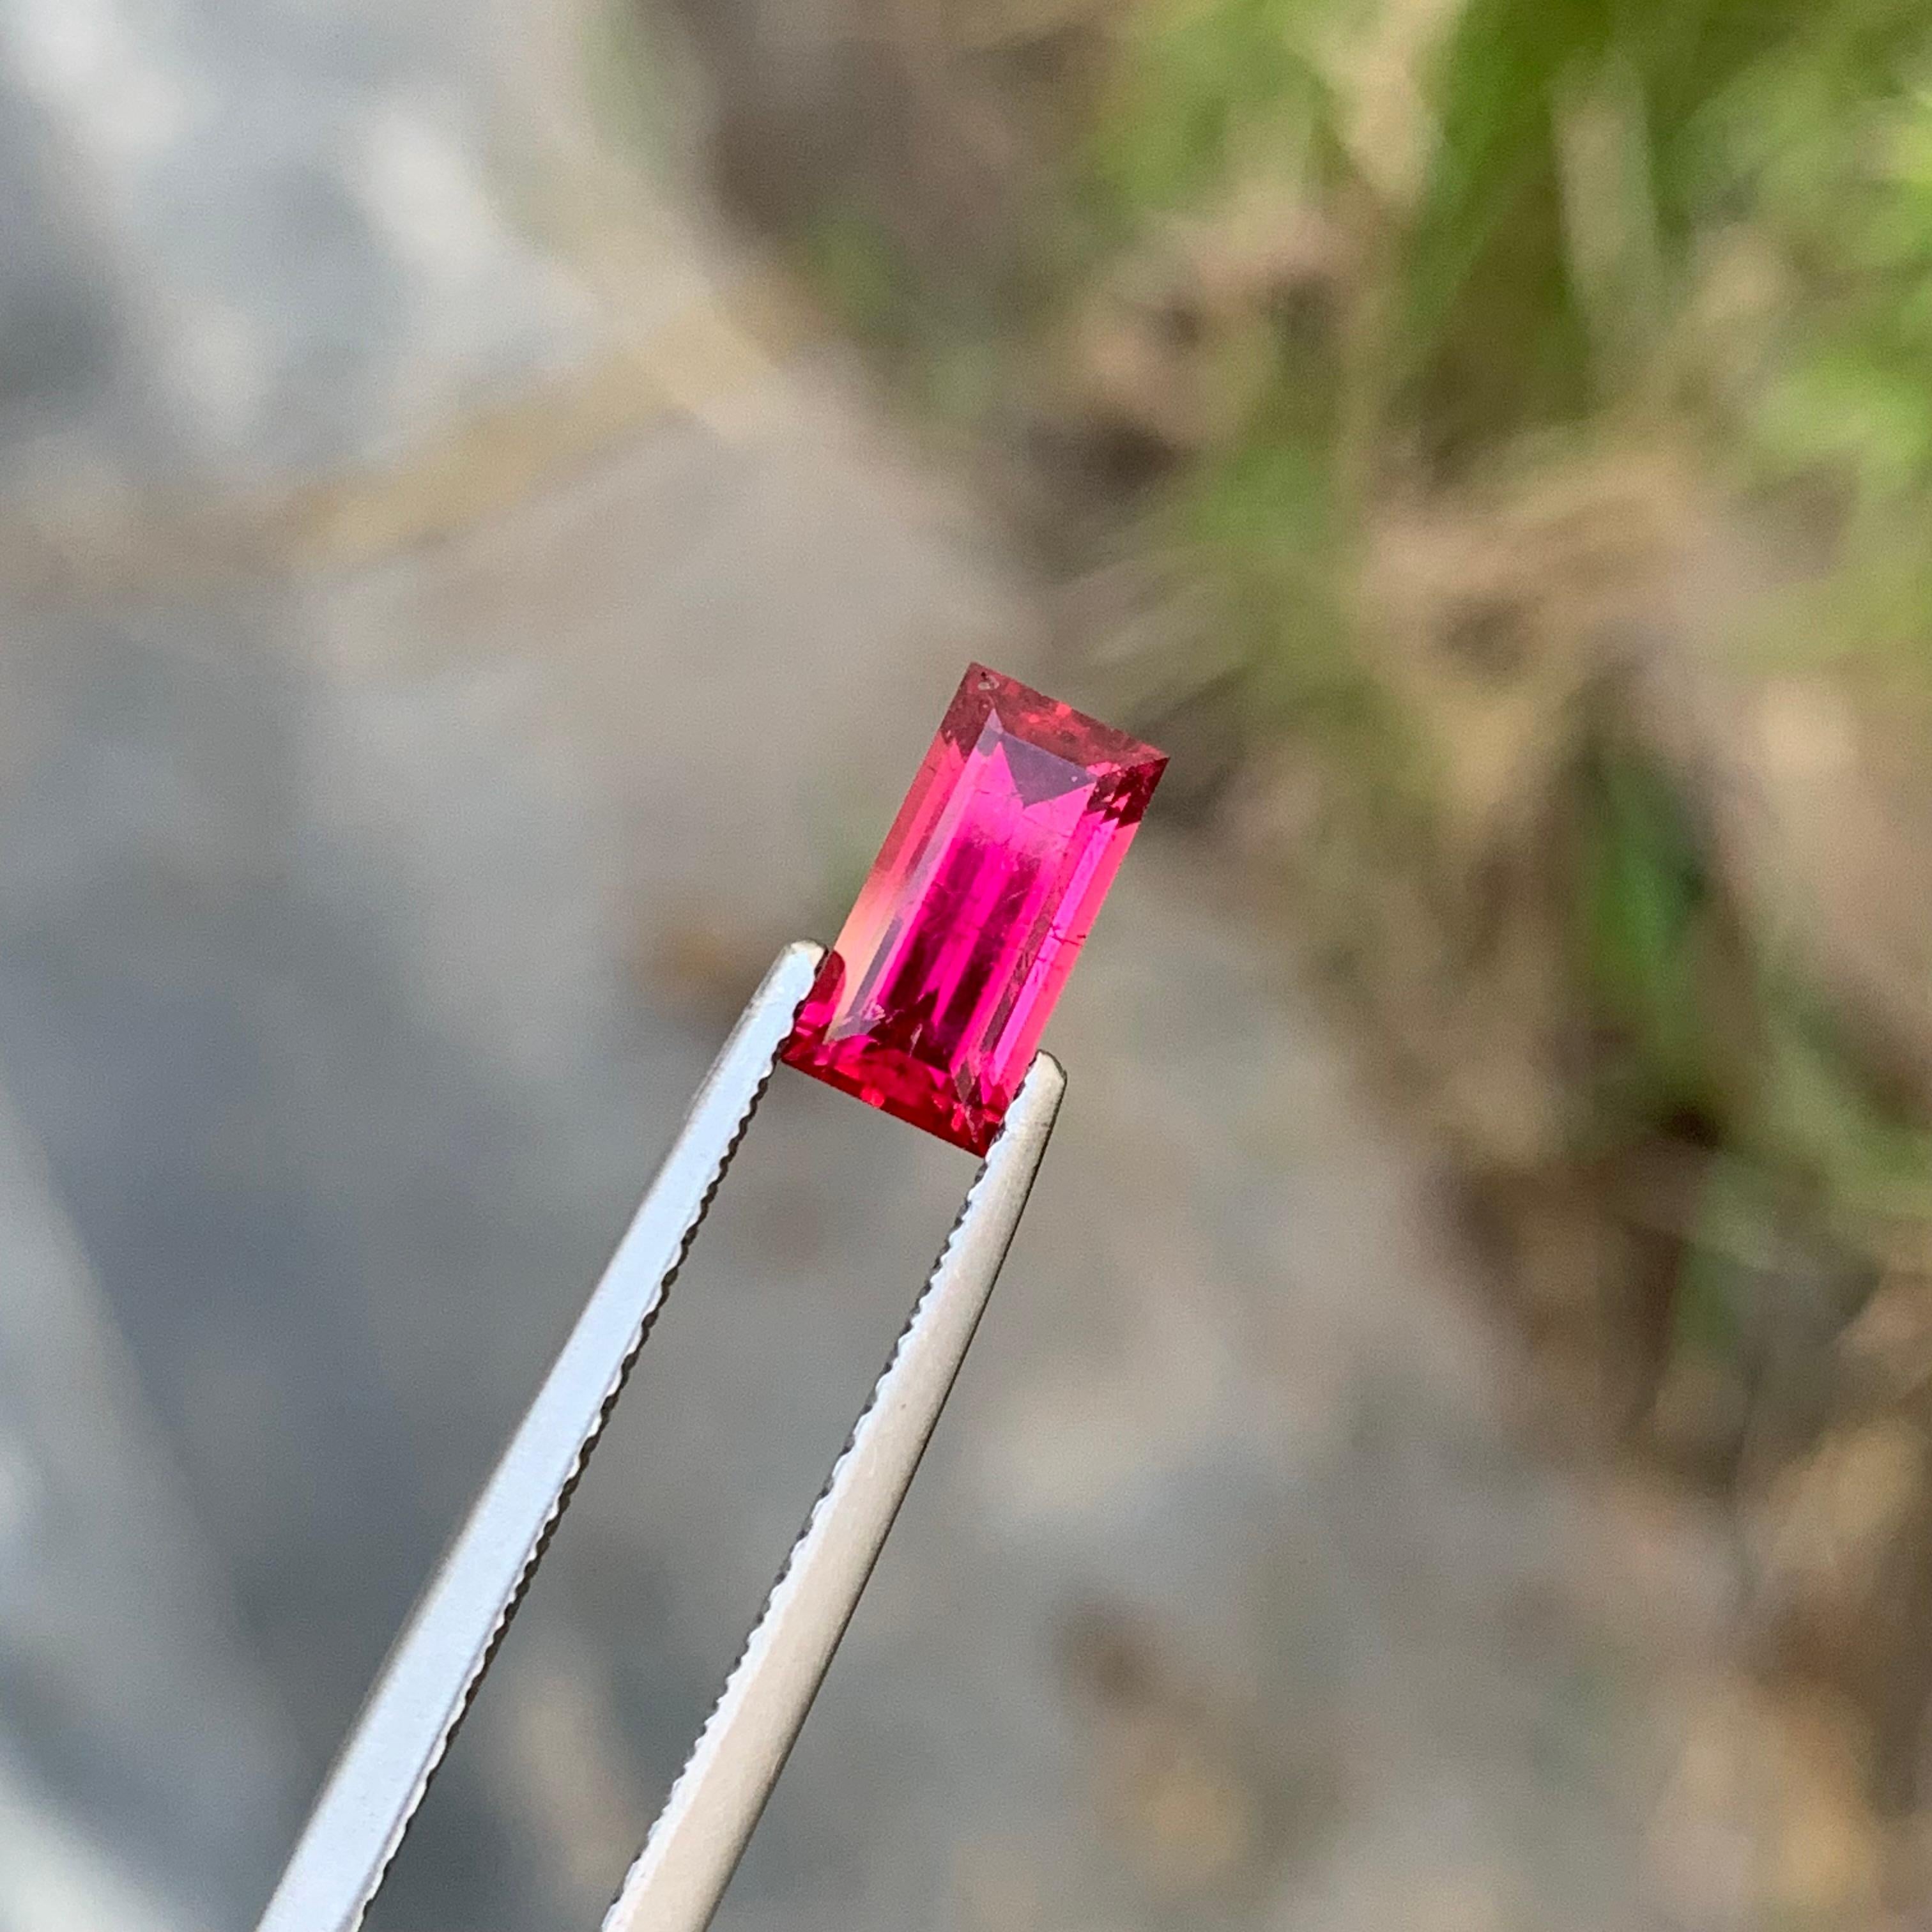 Loose Rubellite Tourmaline

Weight: 0.85 Carats
Dimension:  8.3 x 4.2 x 3.1 Mm
Origin: Afghanistan 
Shape: Baguette 
Cut: Baguette 
Color: Pink 
Certificate: On Demand

Rubellite tourmaline, often regarded as the 